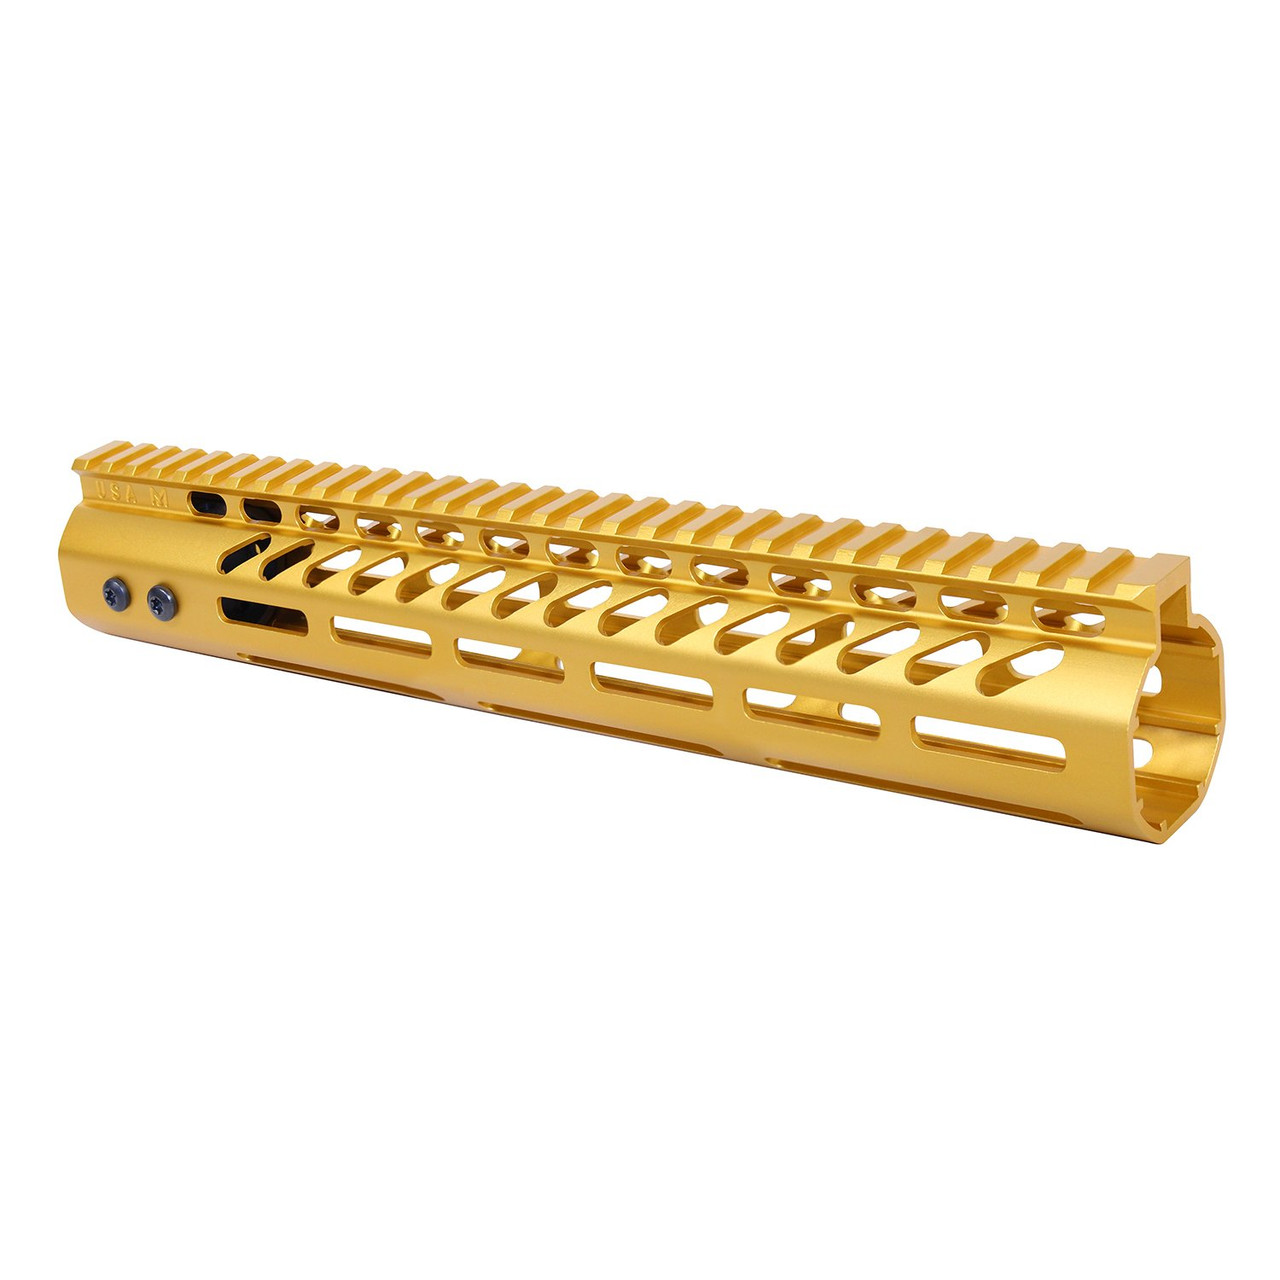 Guntec USA GT-12MLK-308-GOLD 12" Ultra Lightweight Thin M-LOK System Free Floating Handguard With Monolithic Top Rail (.308 Cal) (Anodized Gold)